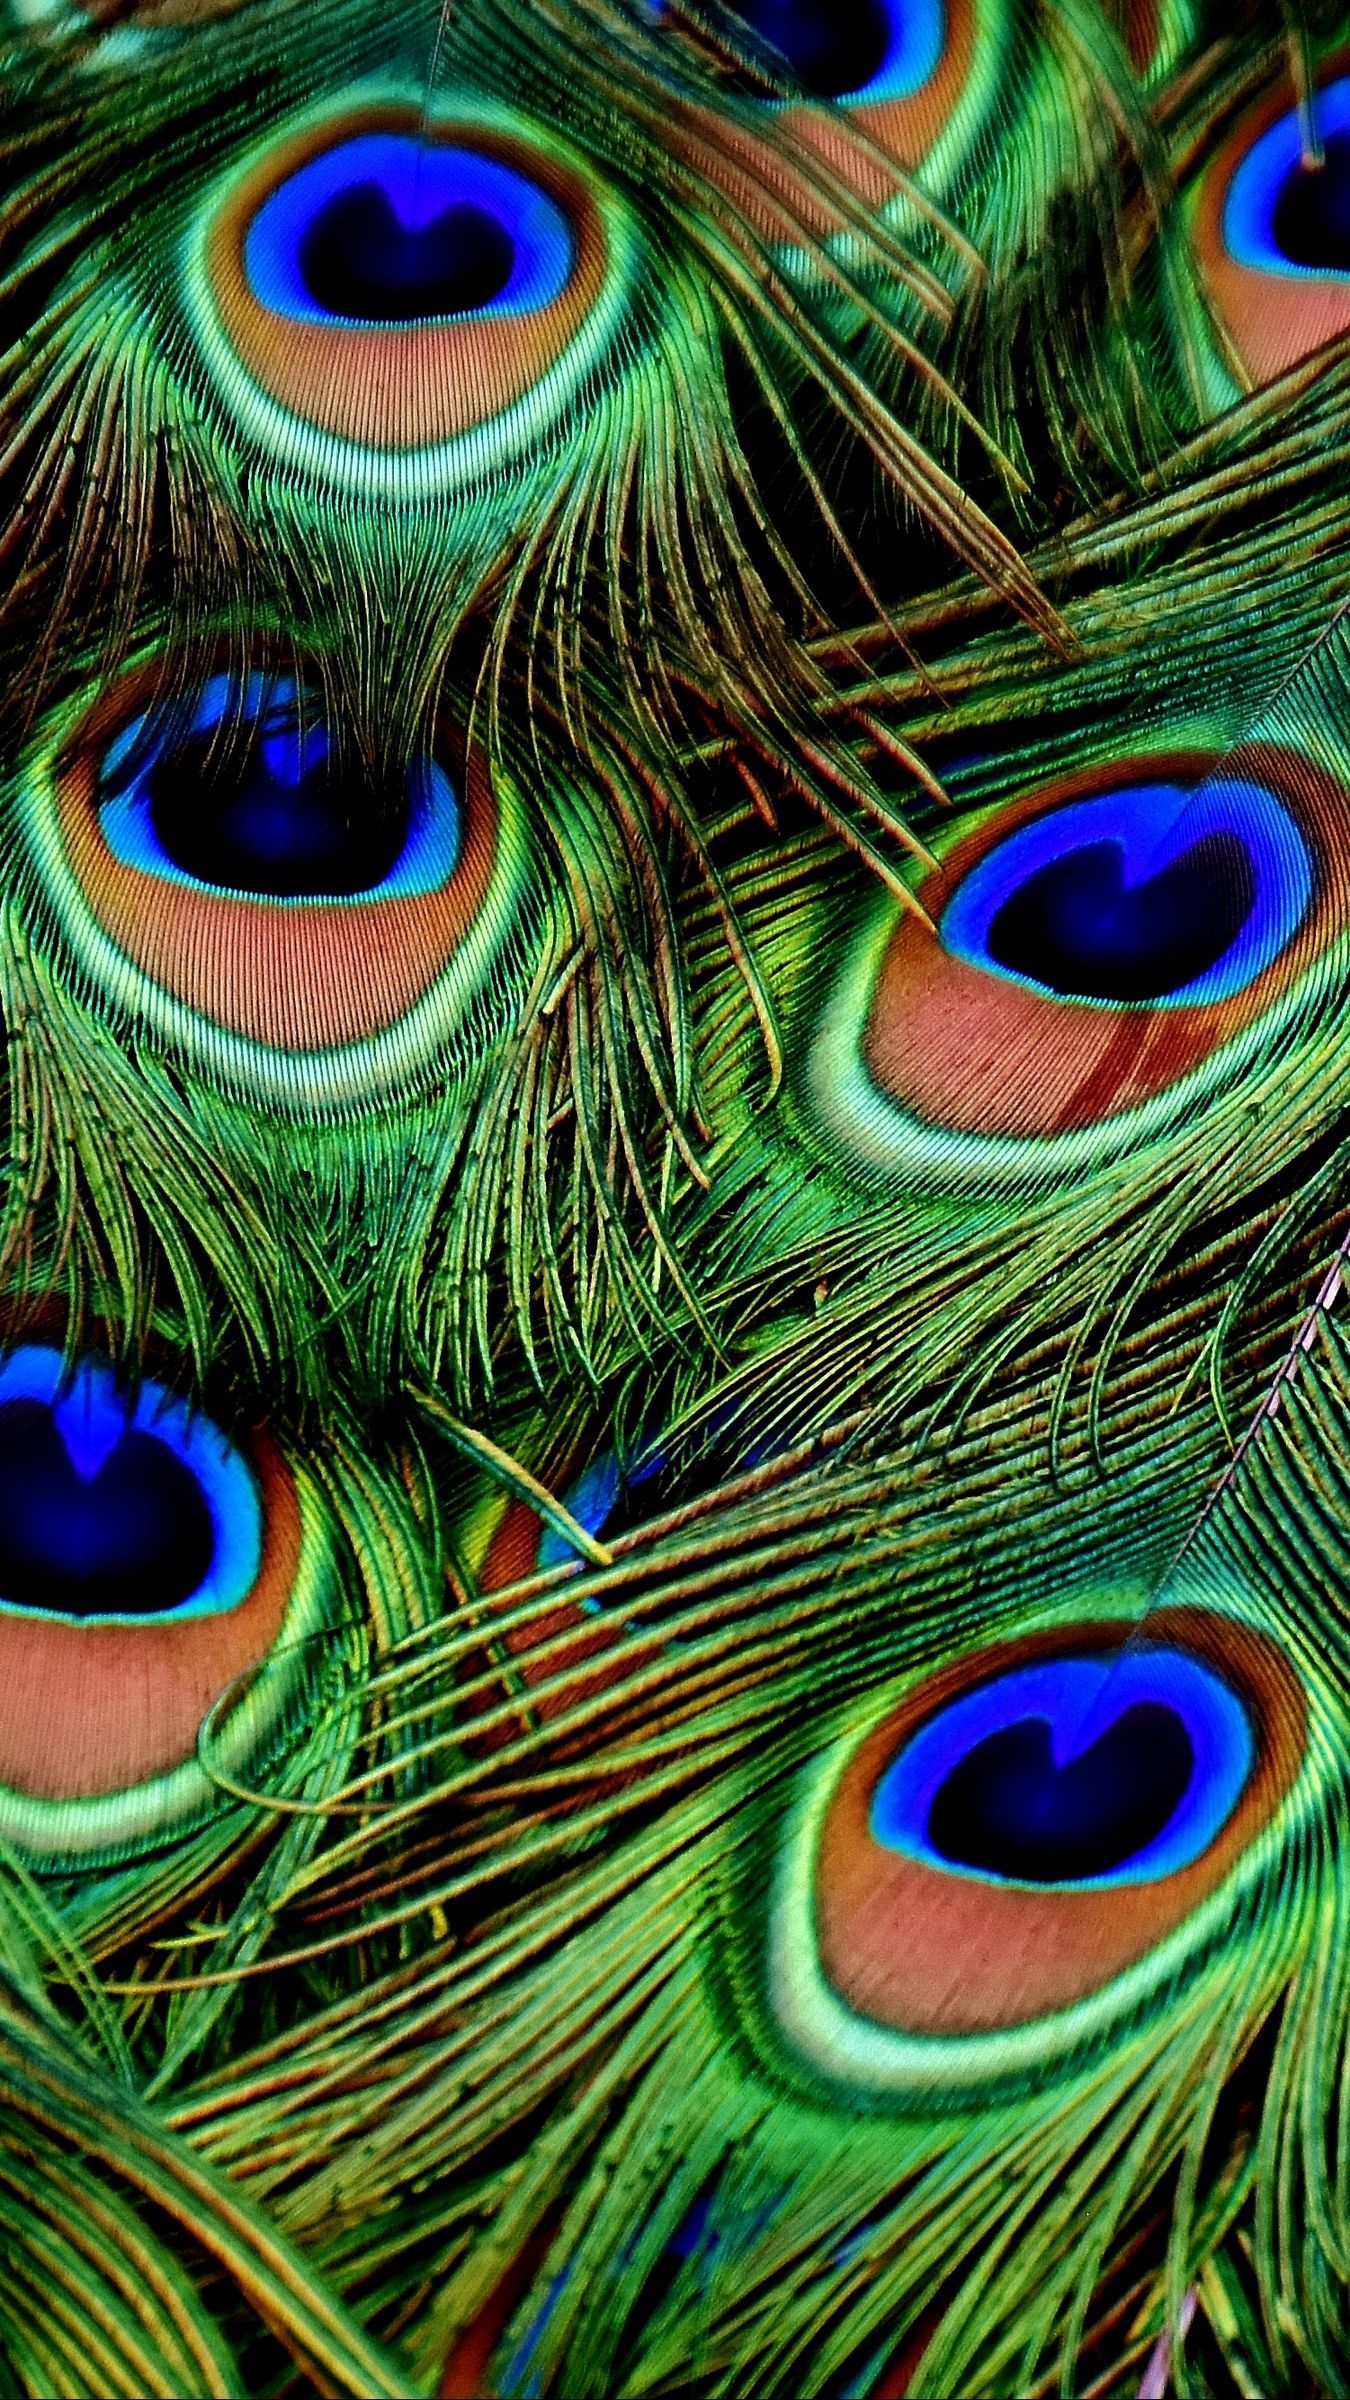 Download wallpaper 1350x2400 peacocks, feathers, patterns iphone 8+/7+/6s+/for parall. Colourful wallpaper iphone, Lord krishna HD wallpaper, Feather wallpaper